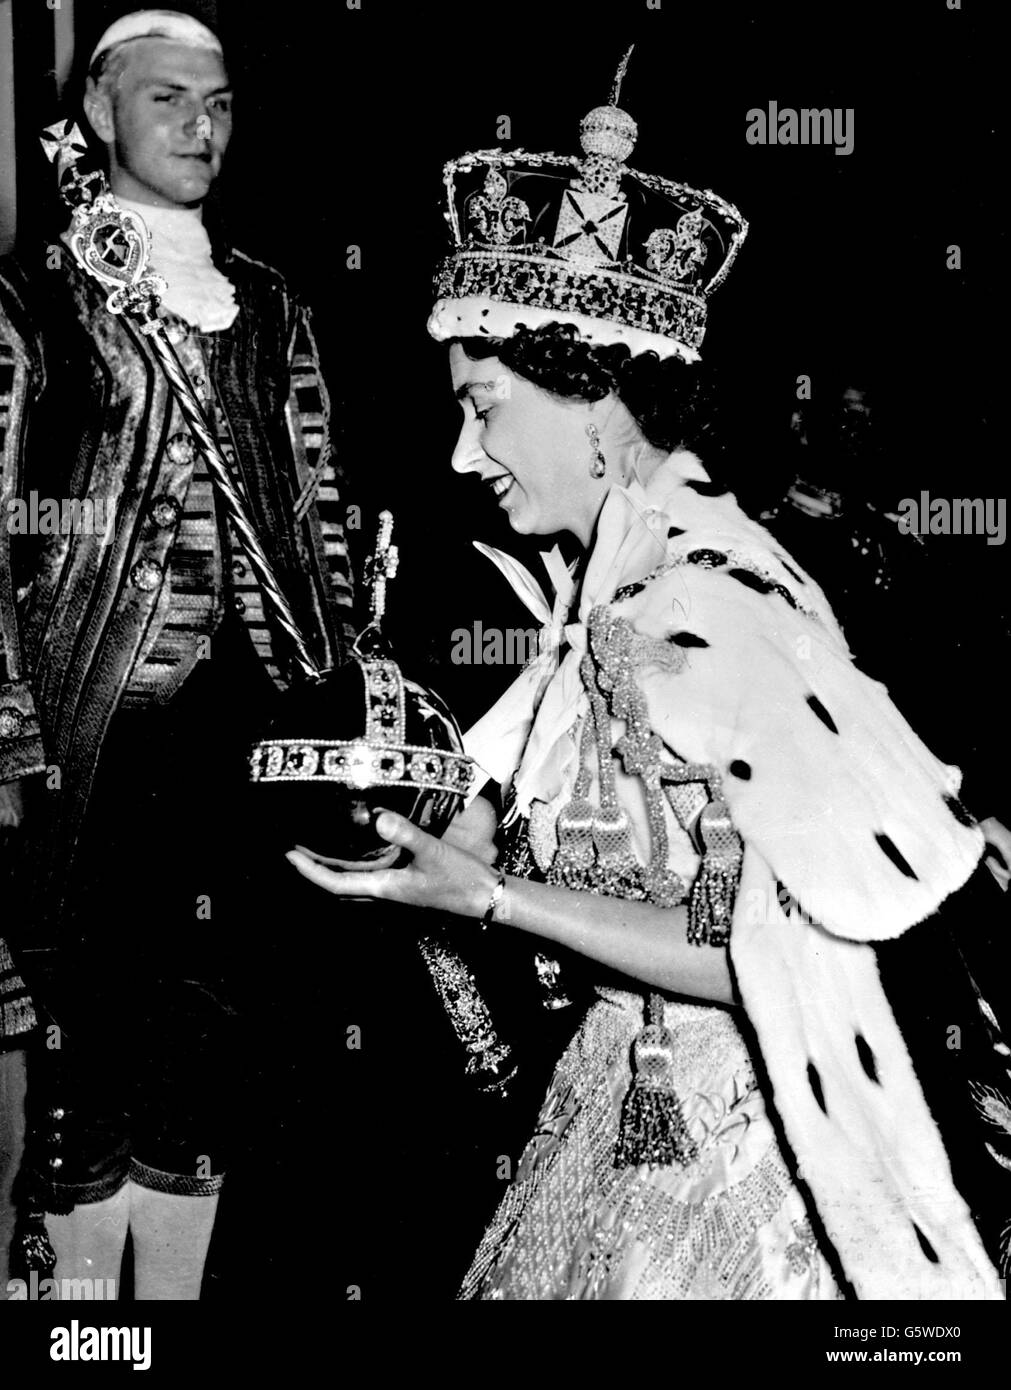 The smiling Queen Elizabeth II wearing the Imperial State Crown and carrying the Orb after alighting from the State Coach at Buckingham Palace. Stock Photo